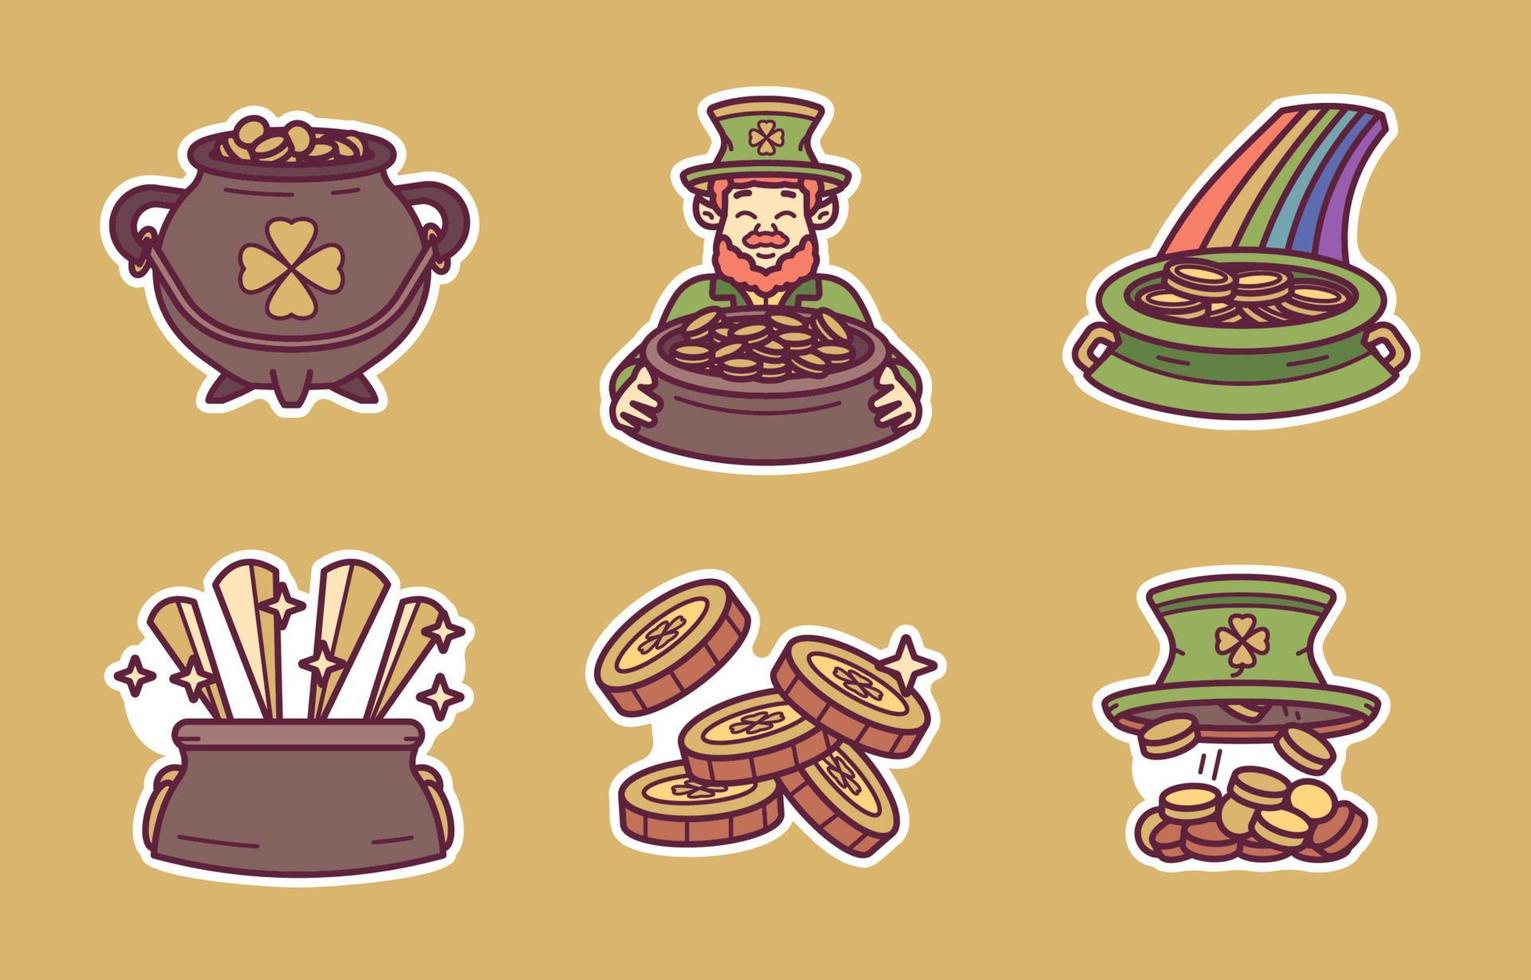 St. Patrick's Day Pot of Gold Sticker Collection vector